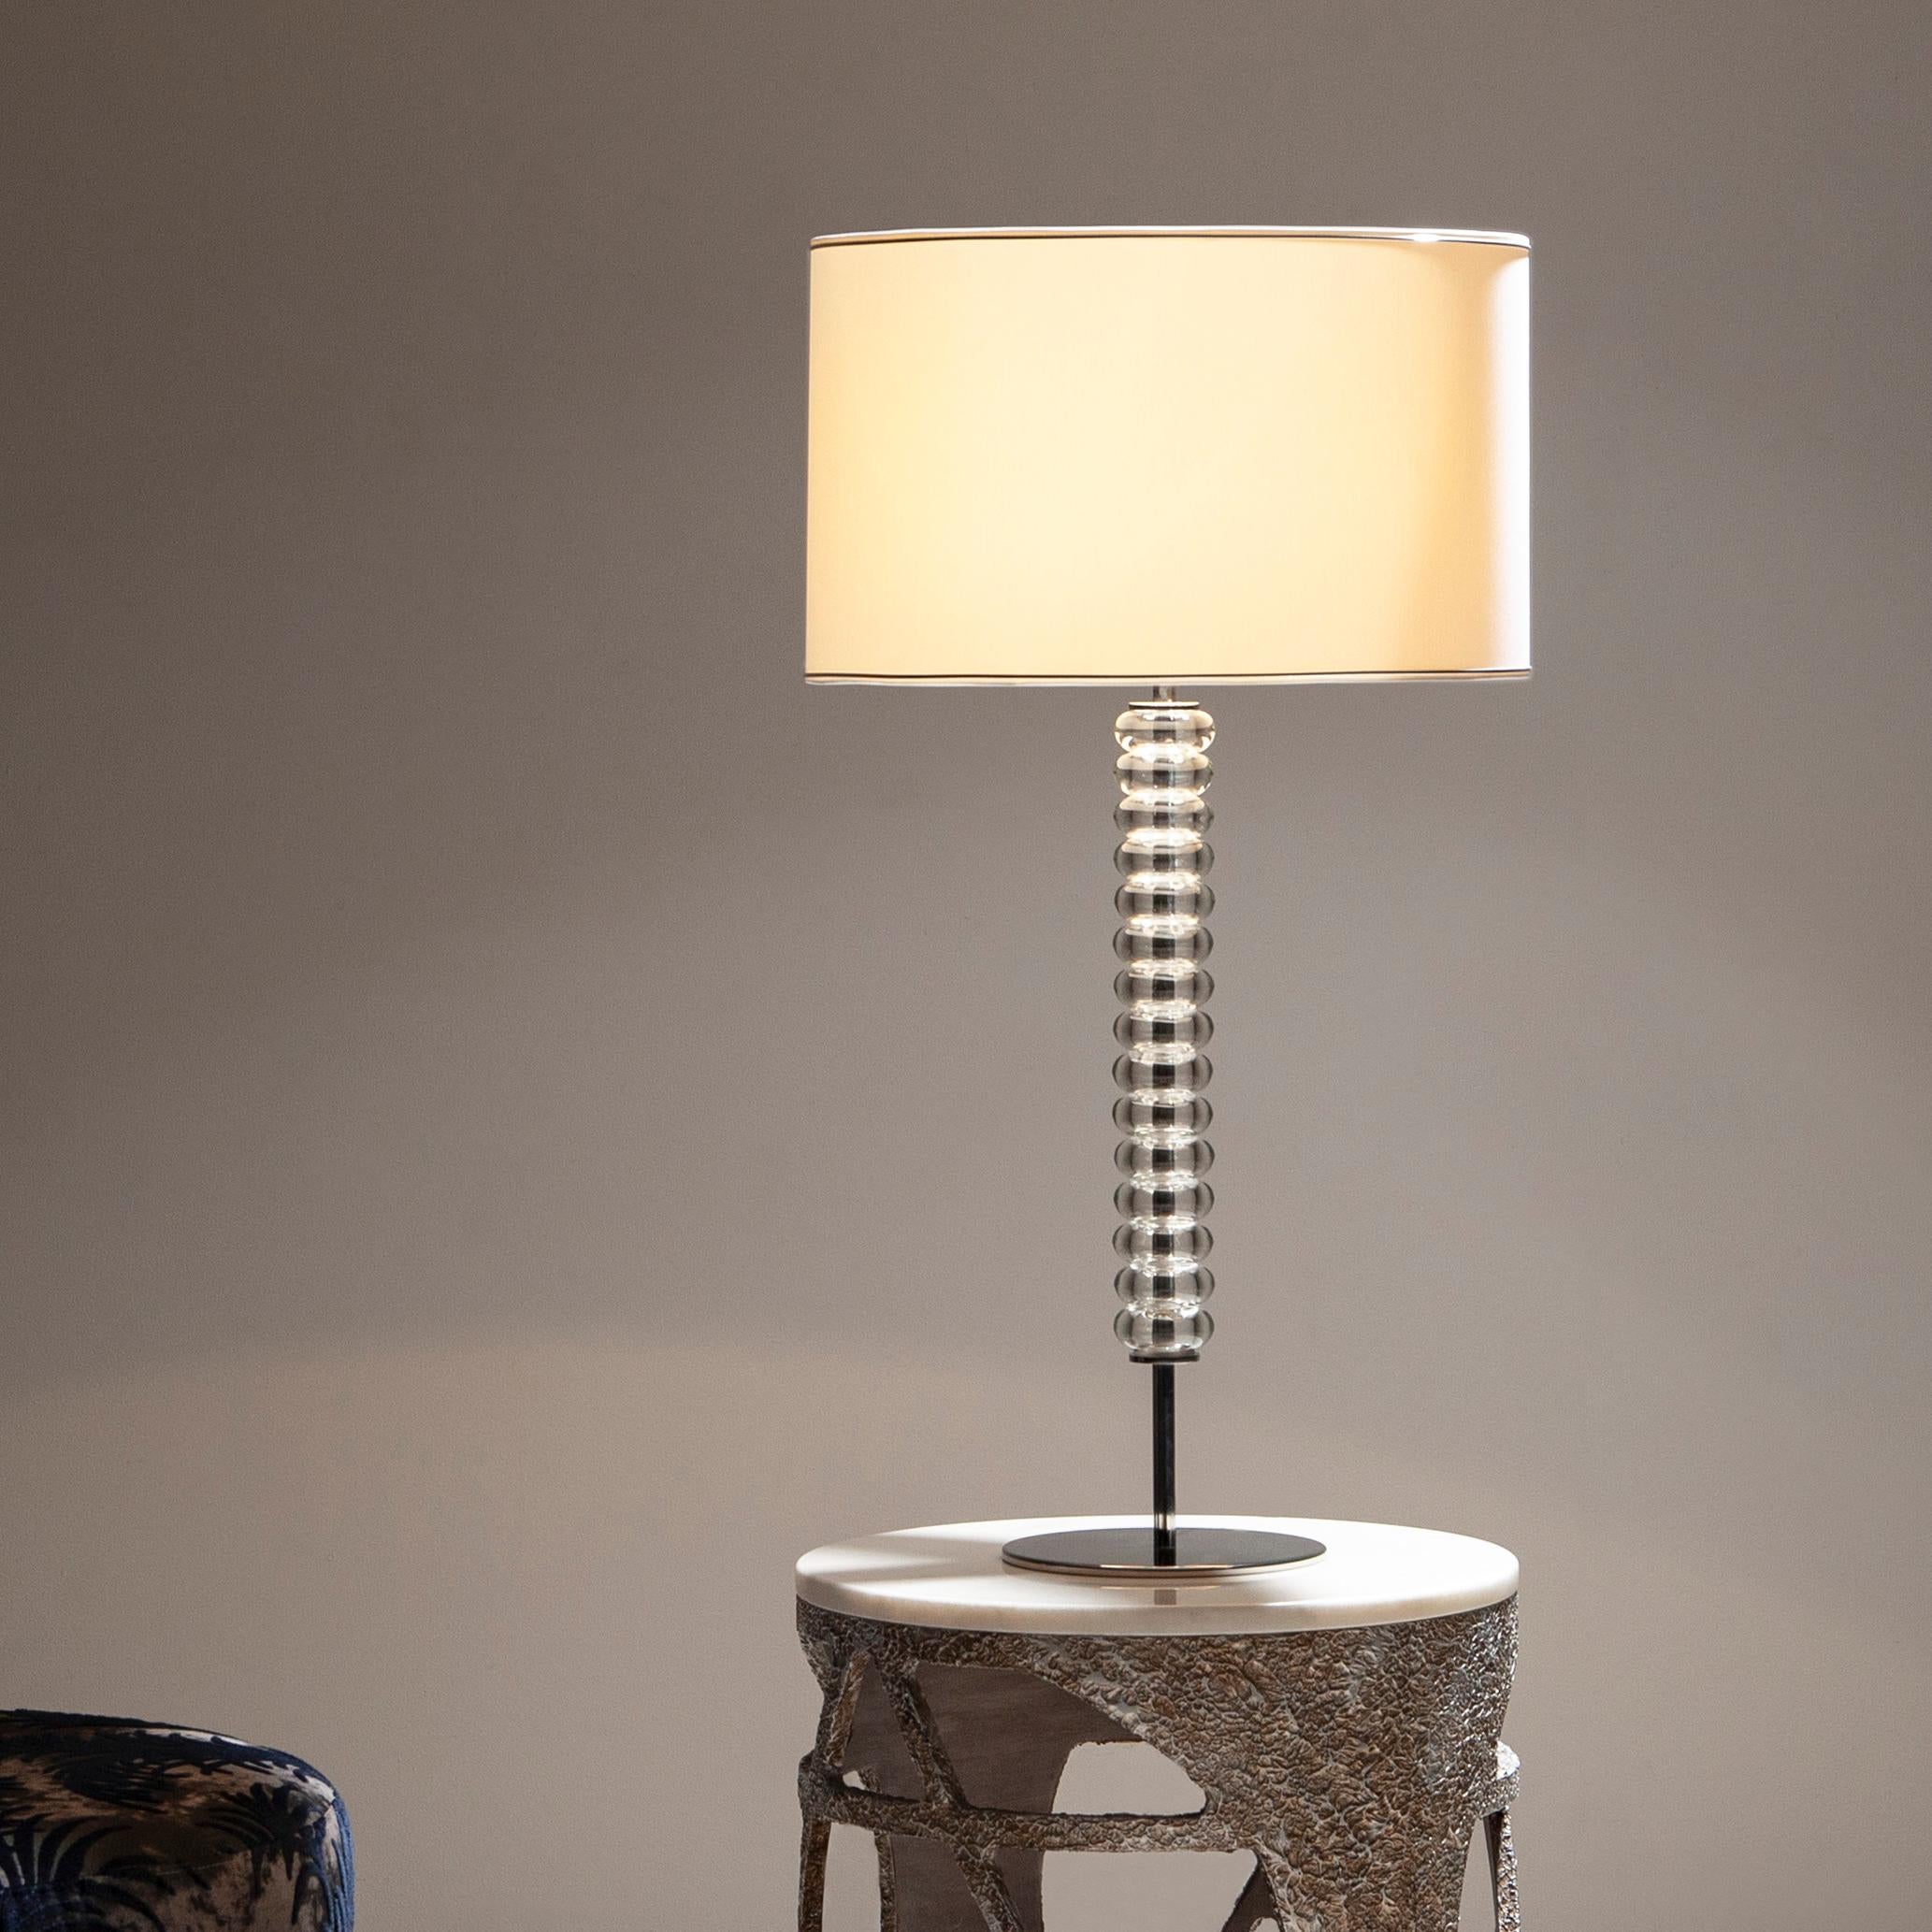 Brass Set of 2 Modern Saldanha Table Lamps, White Shade, Handmade in Portugal For Sale